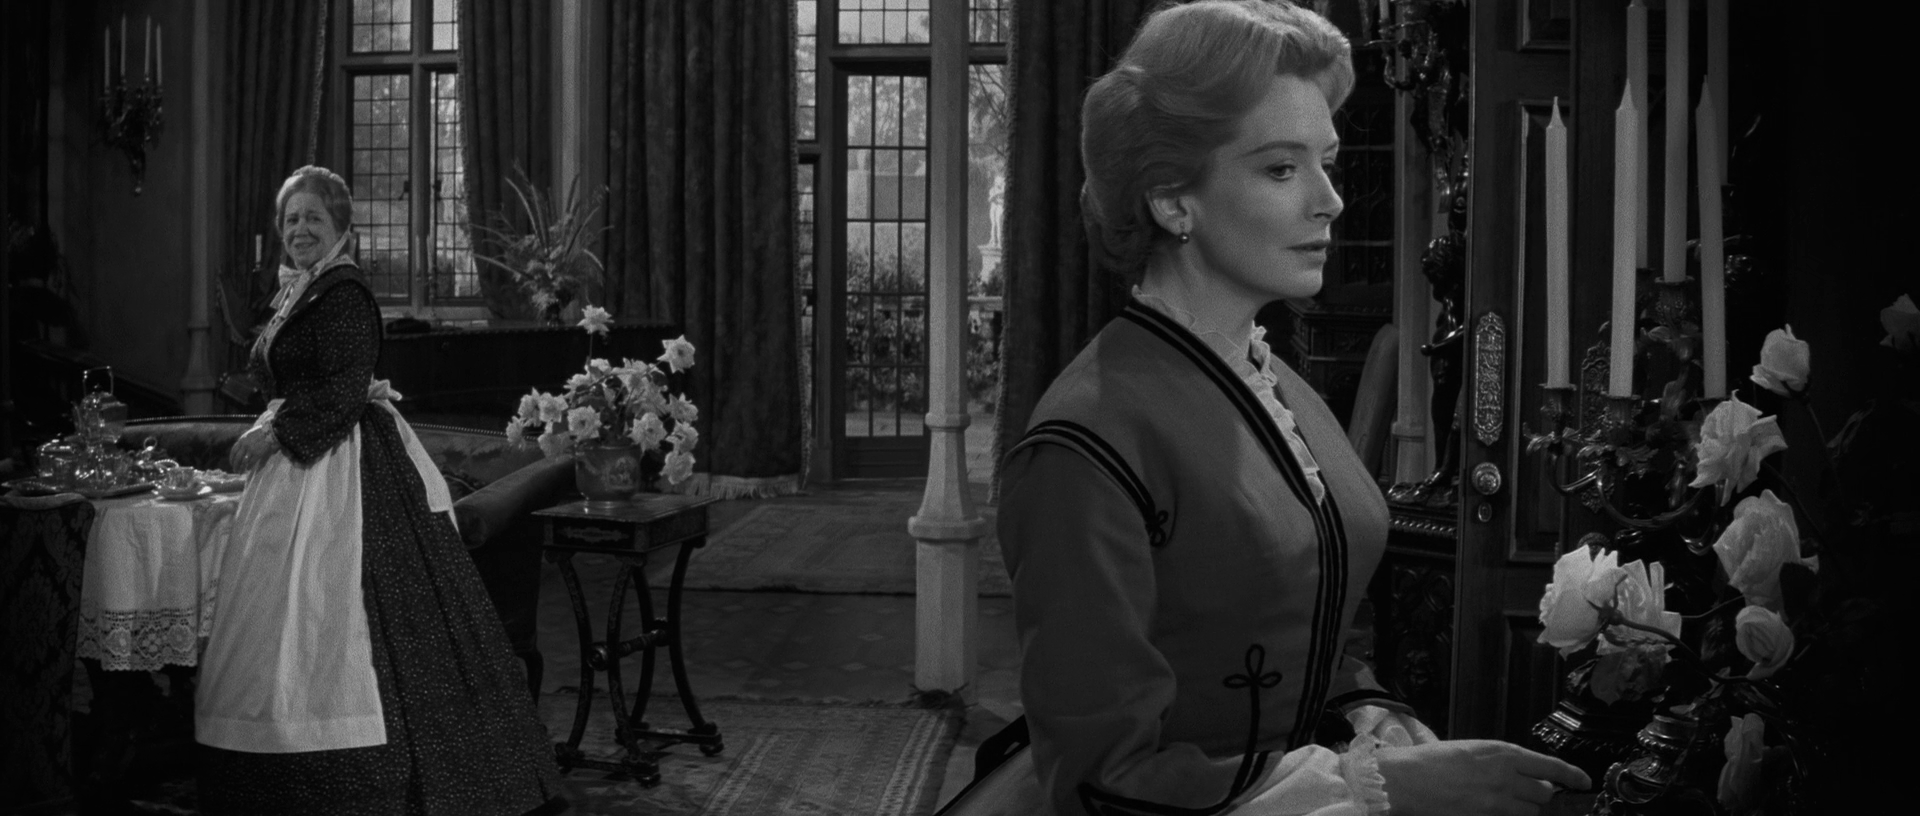 ޹/ The.Innocents.1961.REMASTERED.1080p.BluRay.X264-AMIABLE 6.56GB-3.png